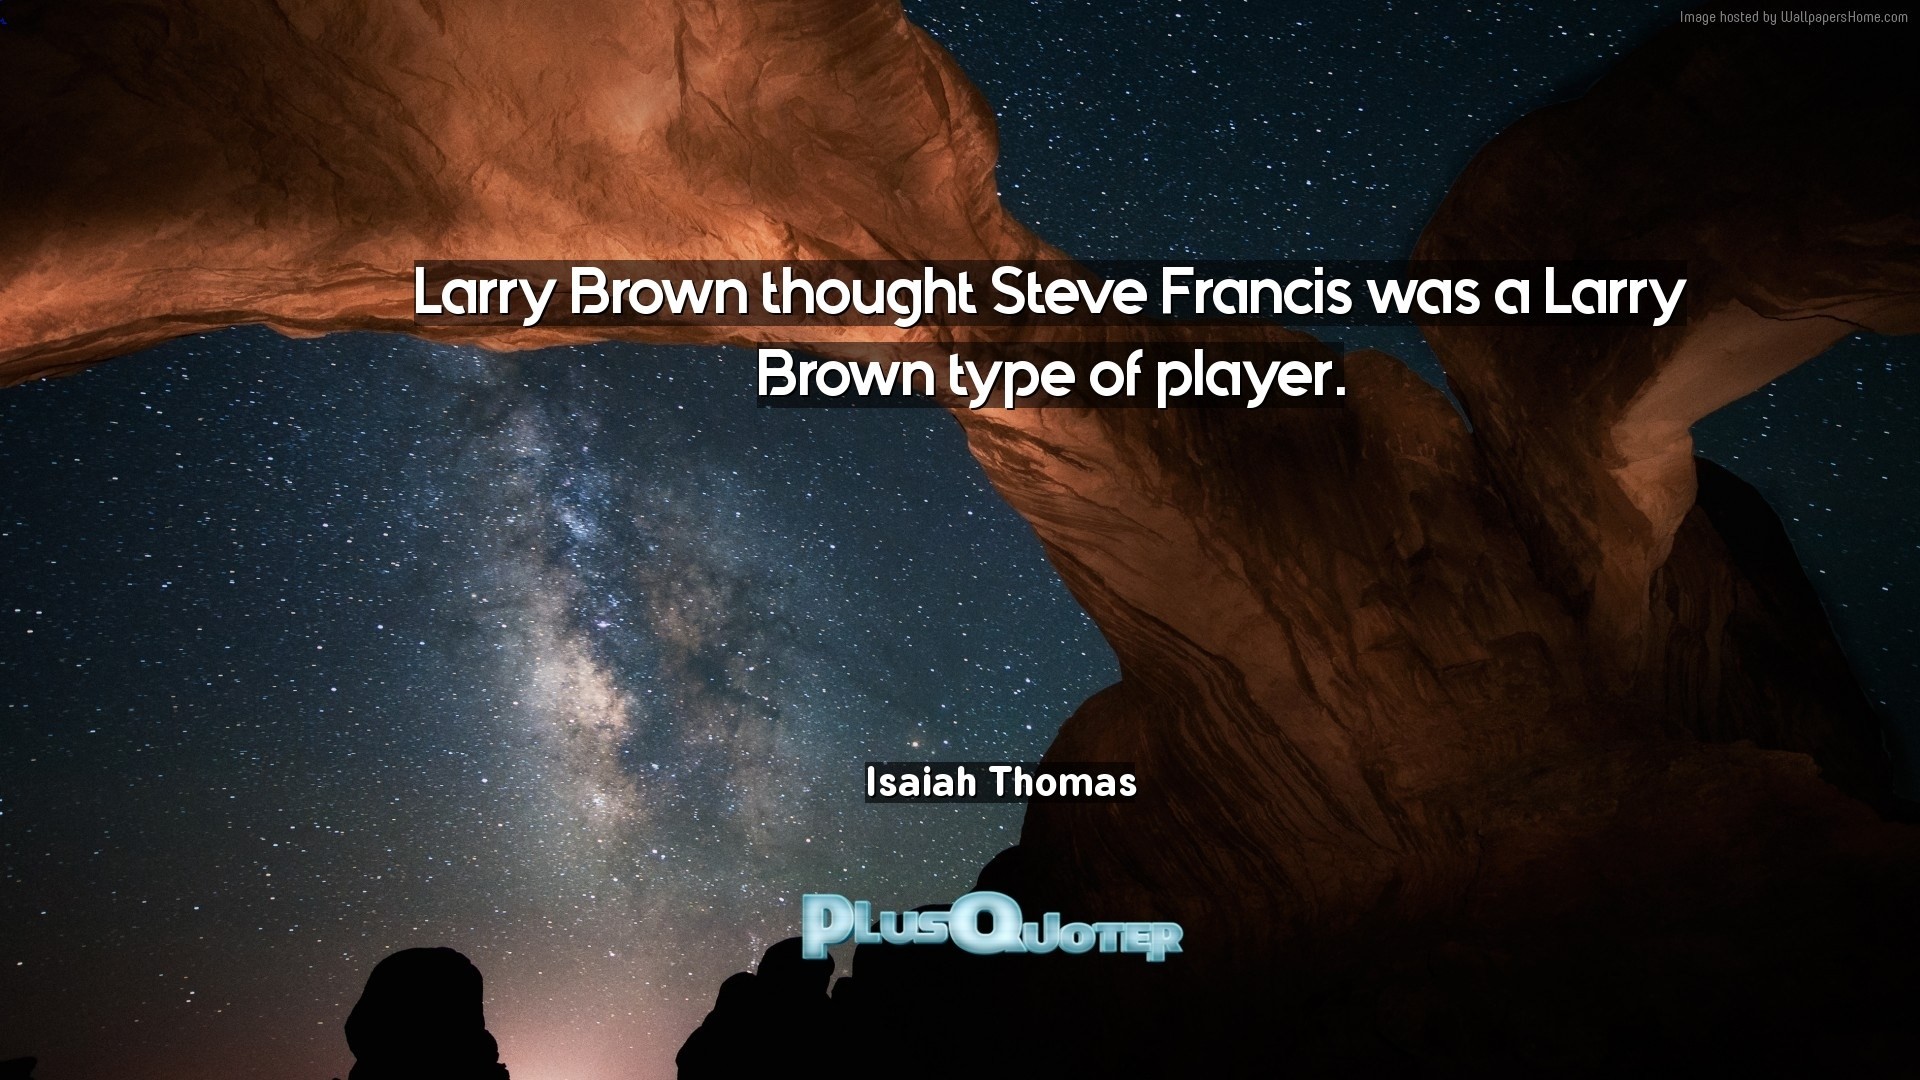 1920x1080 Download Wallpaper with inspirational Quotes- "Larry Brown thought Steve  Francis was a Larry Brown. “